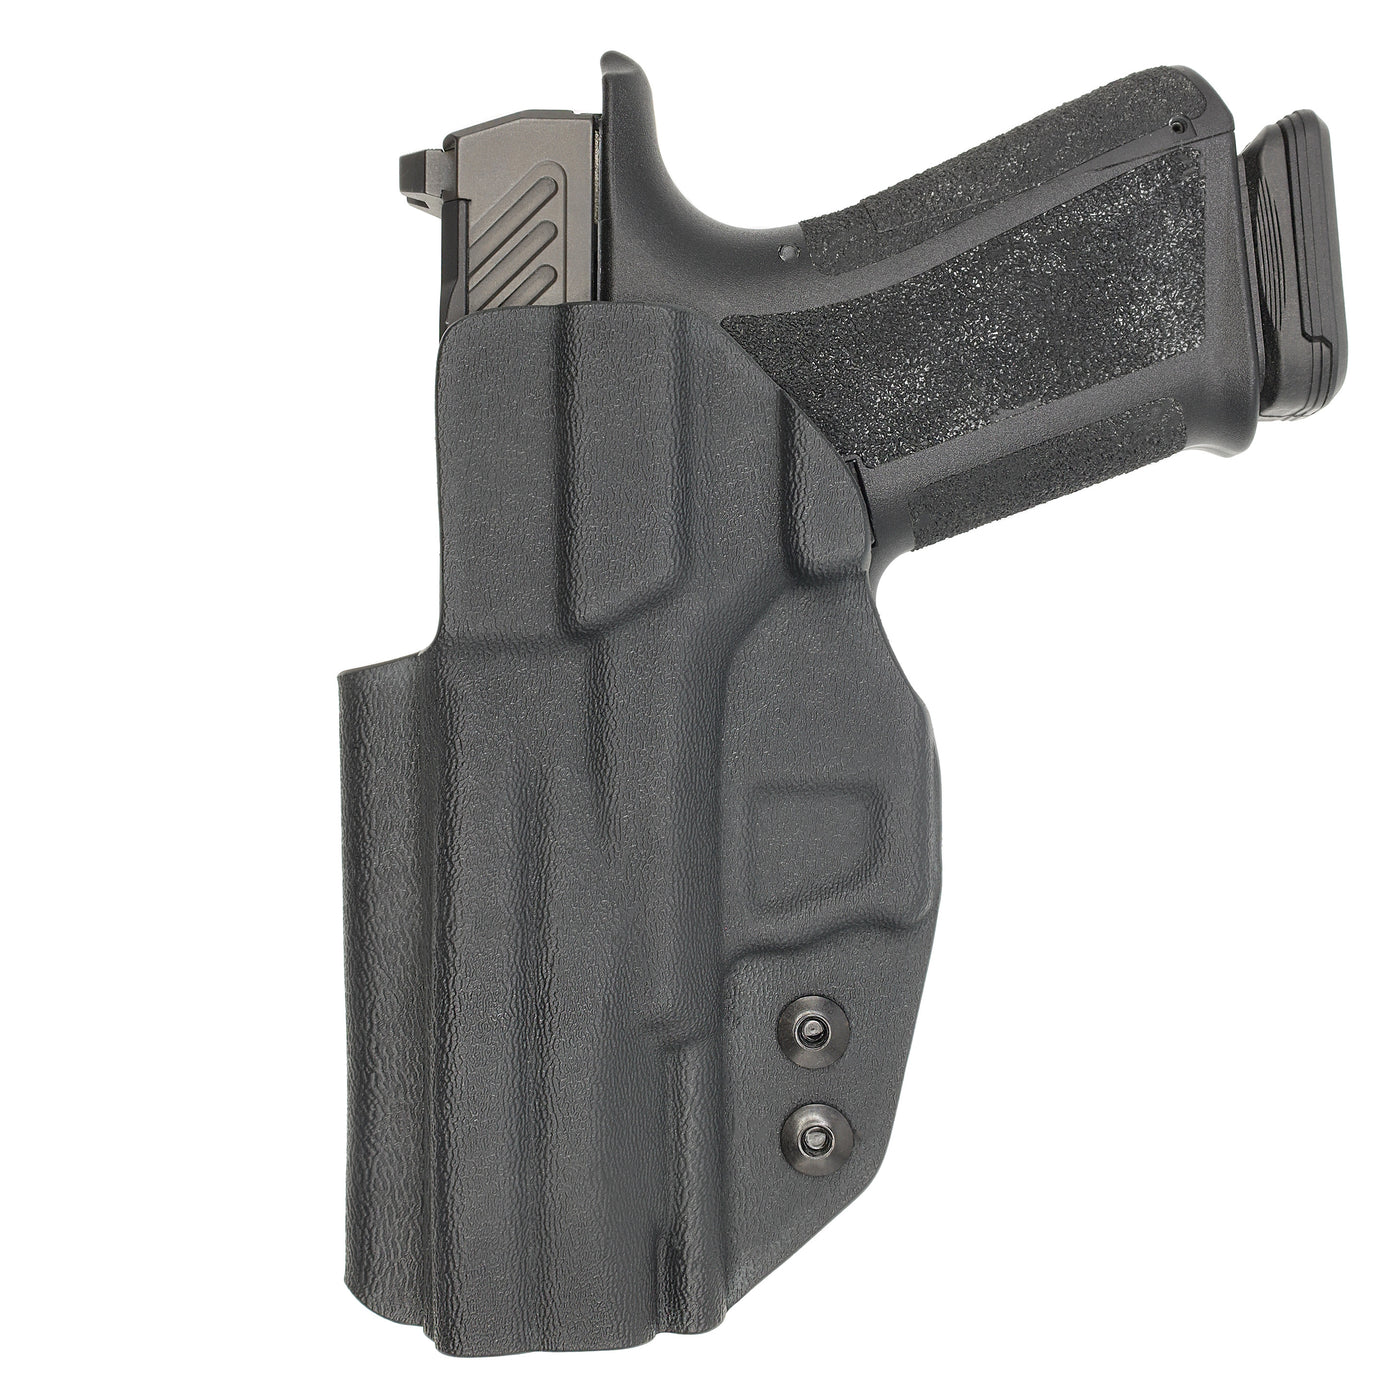 C&G Holsters Quickship IWB Covert Shadow Systems MR920 holstered back view